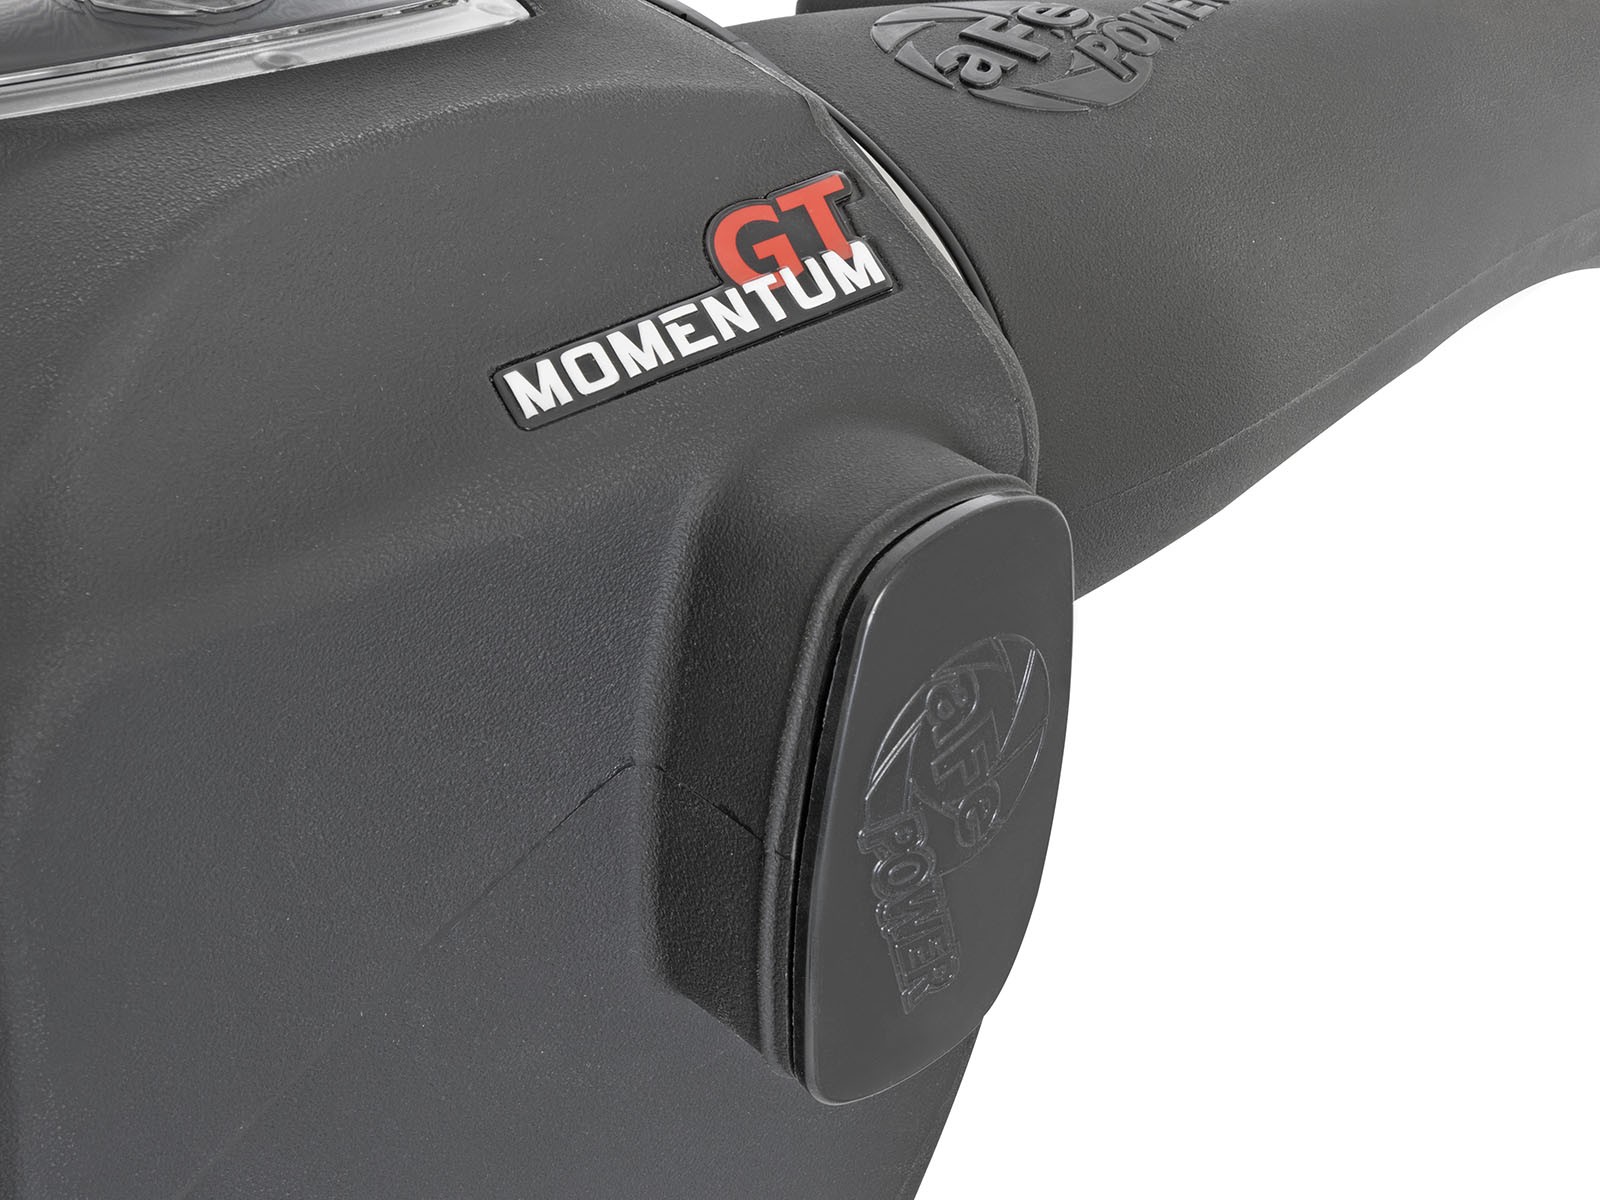 aFe POWER Momentum GT Pro DRY S Cold Air Intake System - Click Image to Close